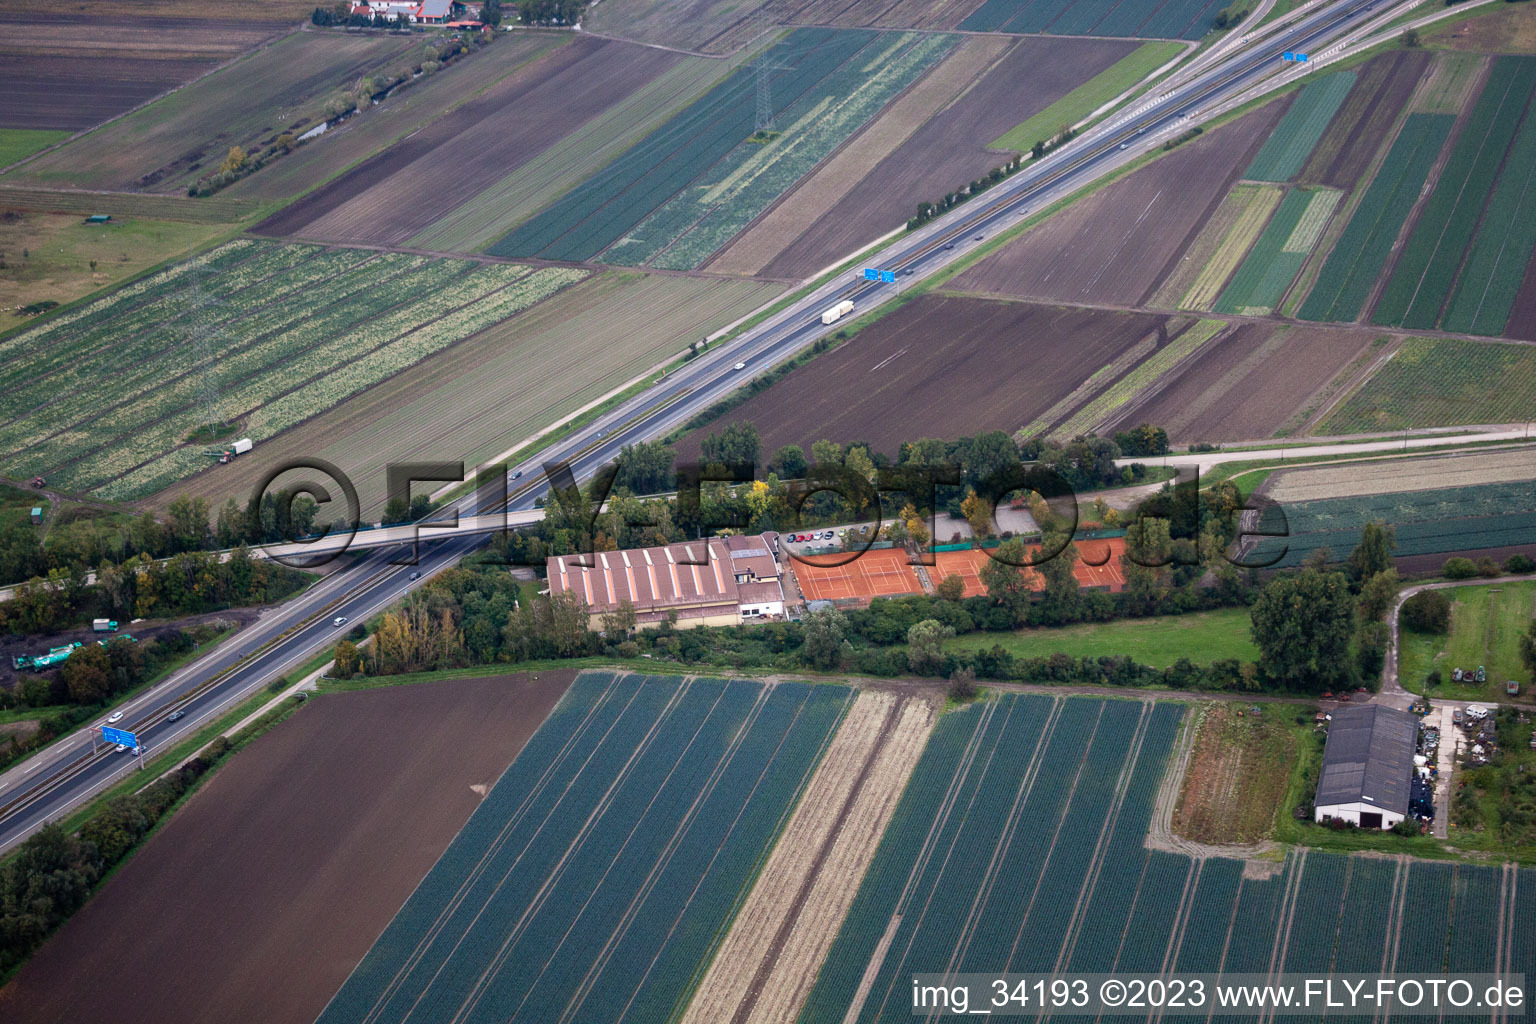 Aerial photograpy of District Ruchheim in Ludwigshafen am Rhein in the state Rhineland-Palatinate, Germany